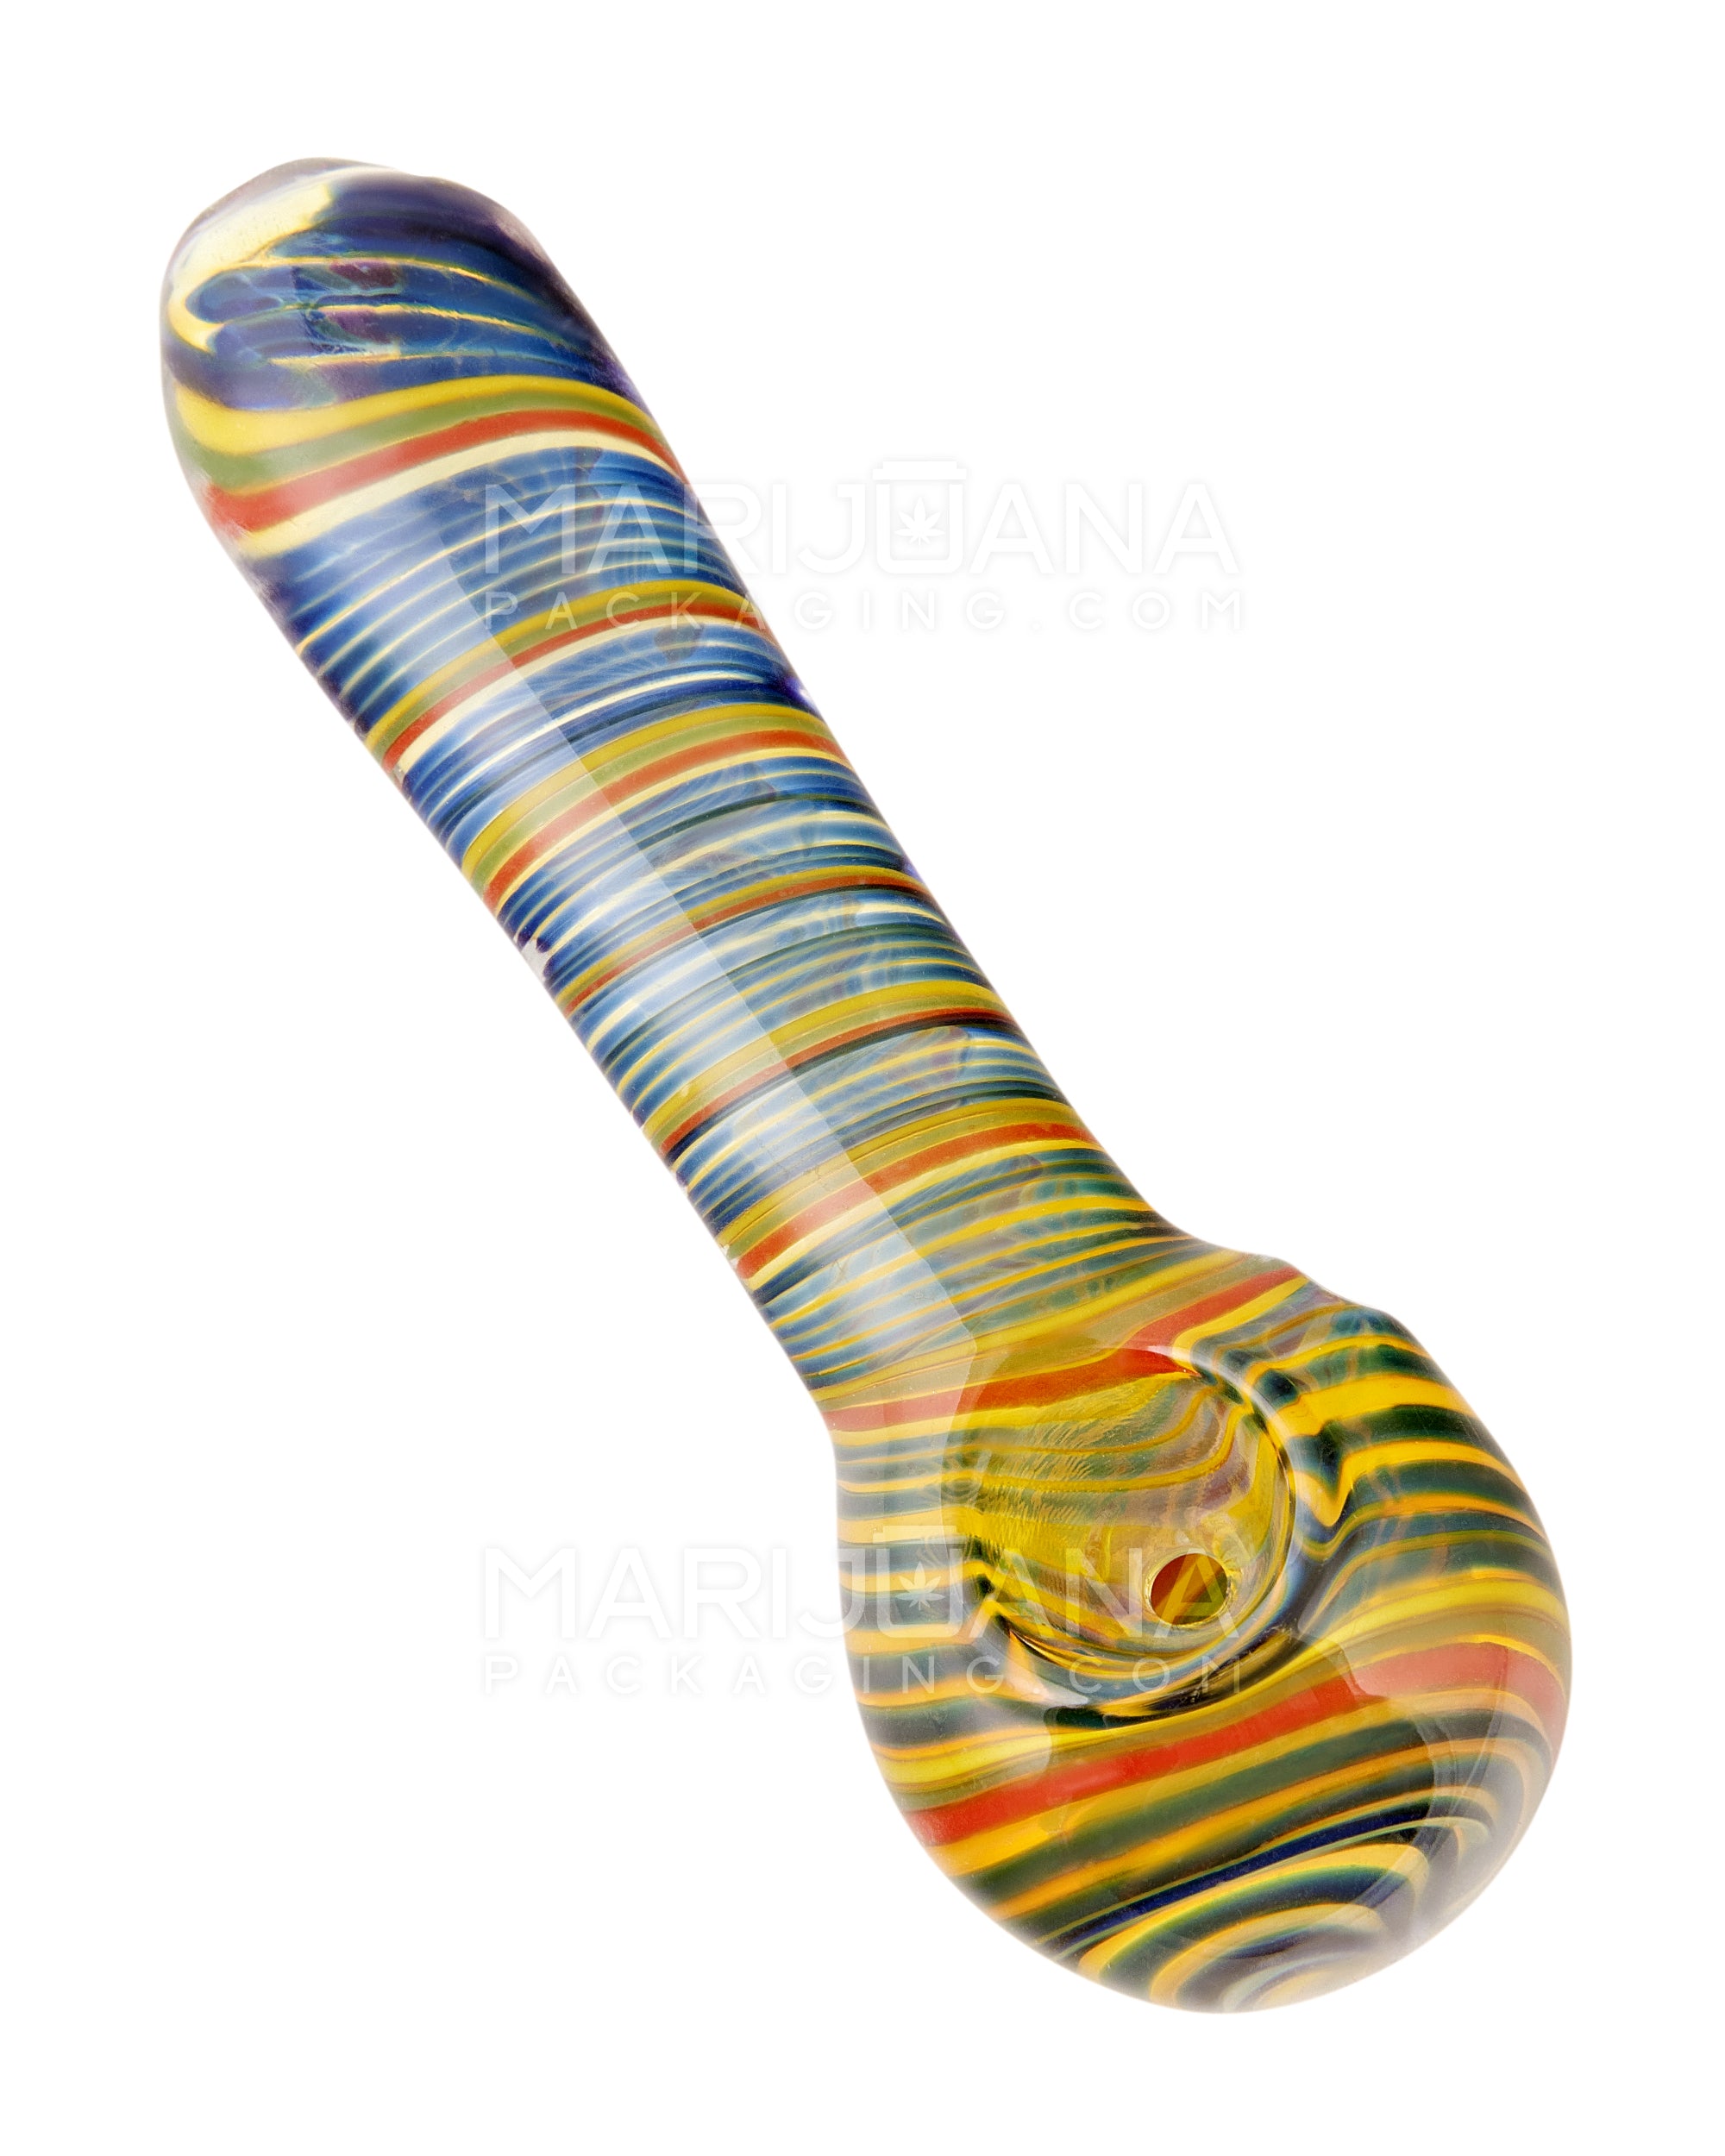 Web & Fumed Rasta Spoon Hand Pipe | 4.5in Long - Glass - Assorted